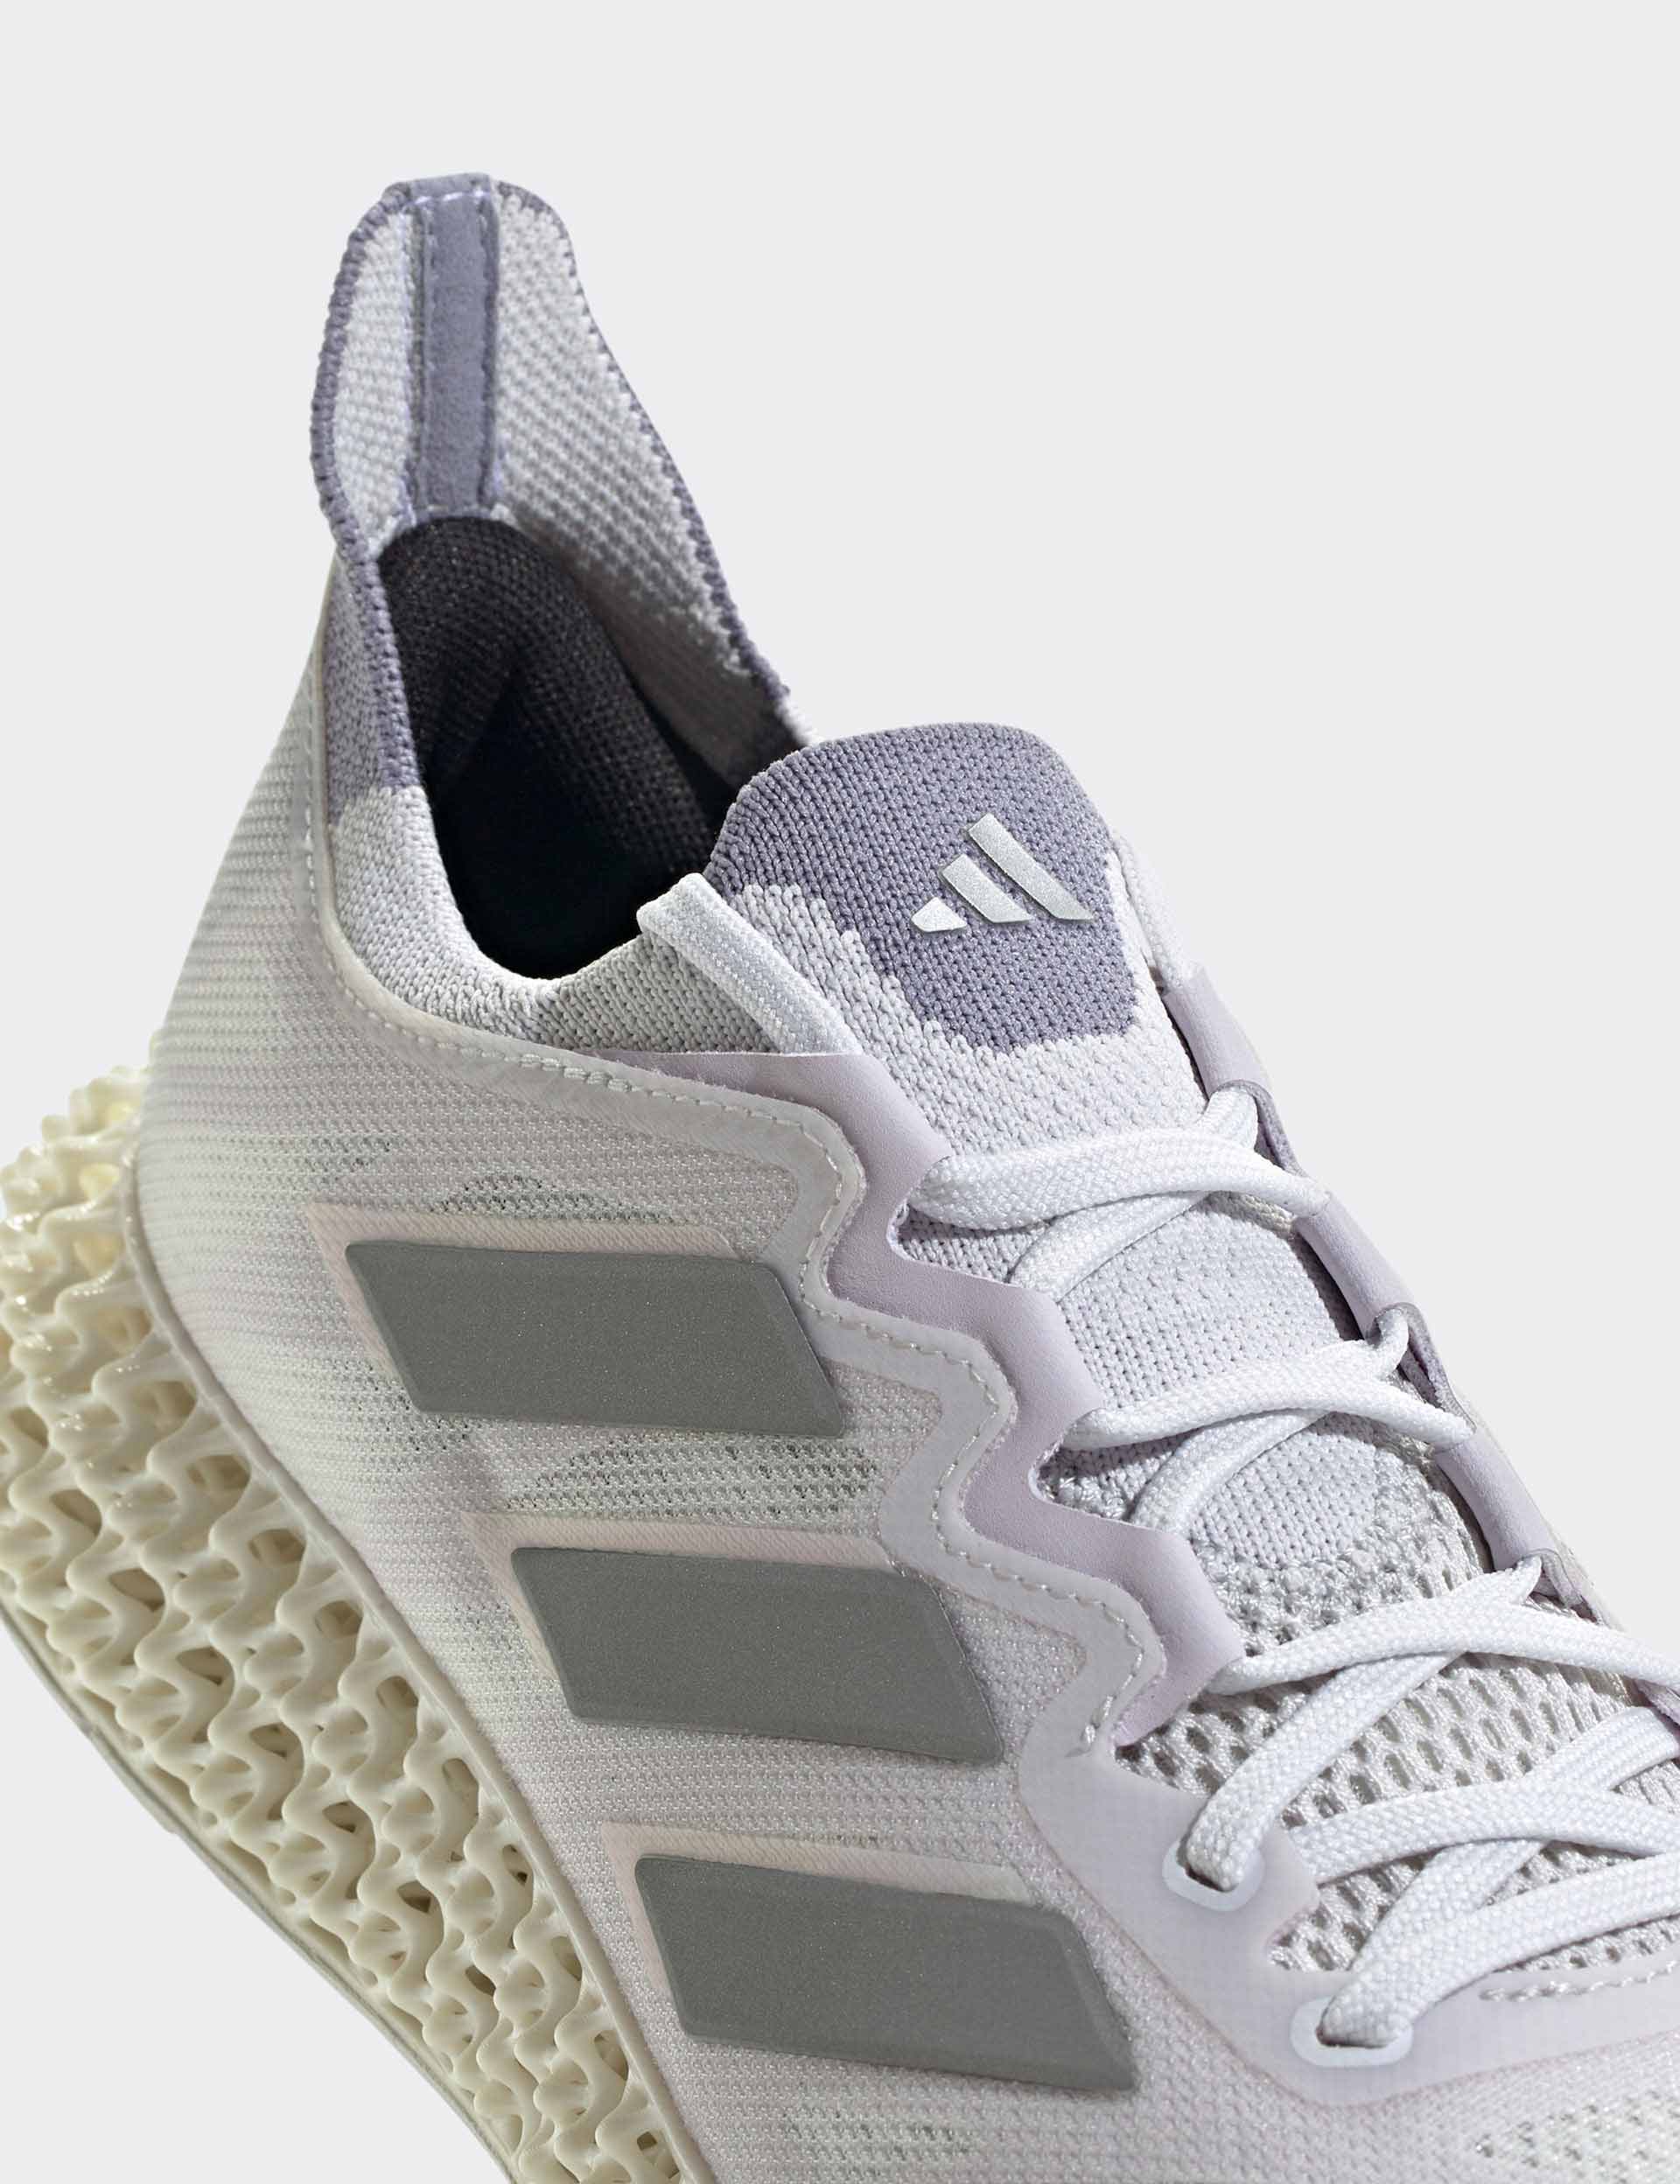 adidas | 4DFWD 3 Running Shoes - Dash Grey/Silver | The